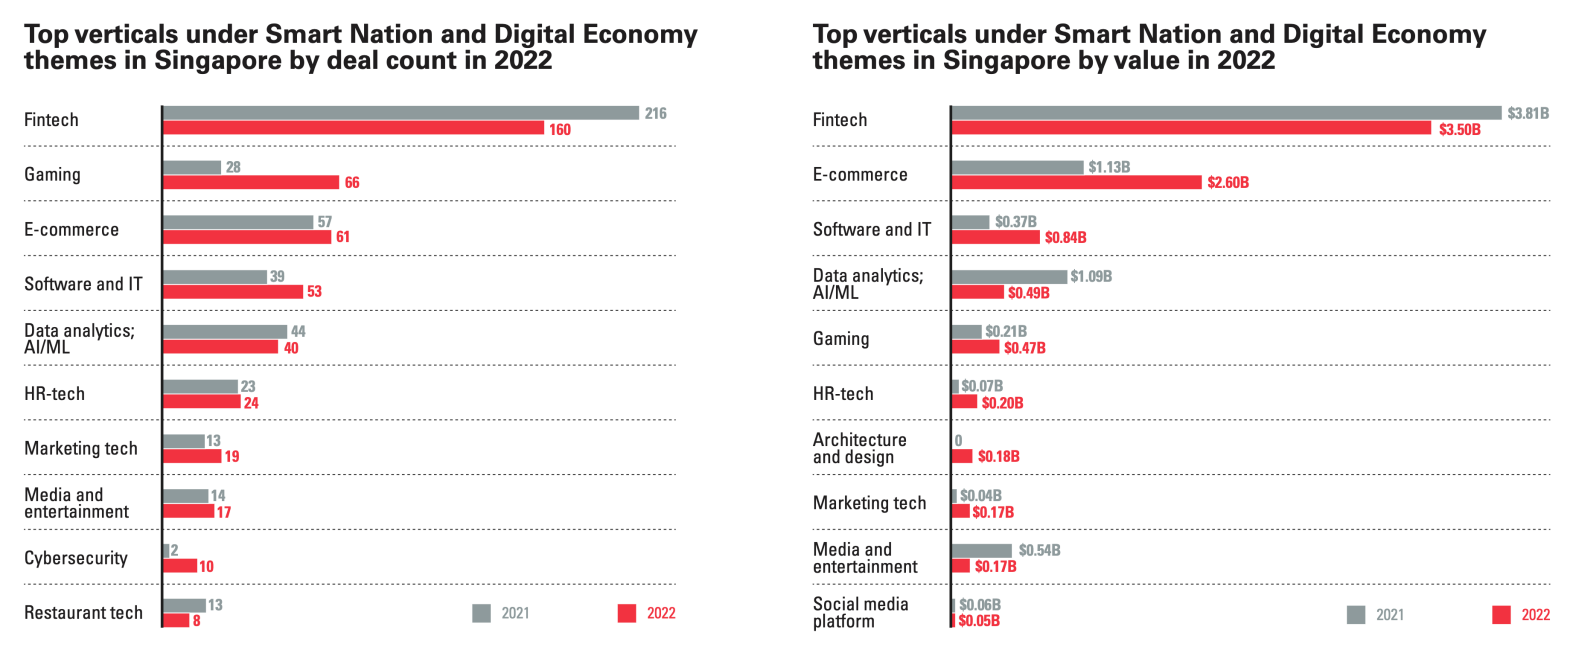 Top verticals under the Smart Nation and Digital Economy themes in Singapore in 2021 and 2022, Source: Singapore Venture Funding Landscape 2022, Enterprise Singapore, DealStreetAsia, March 2023